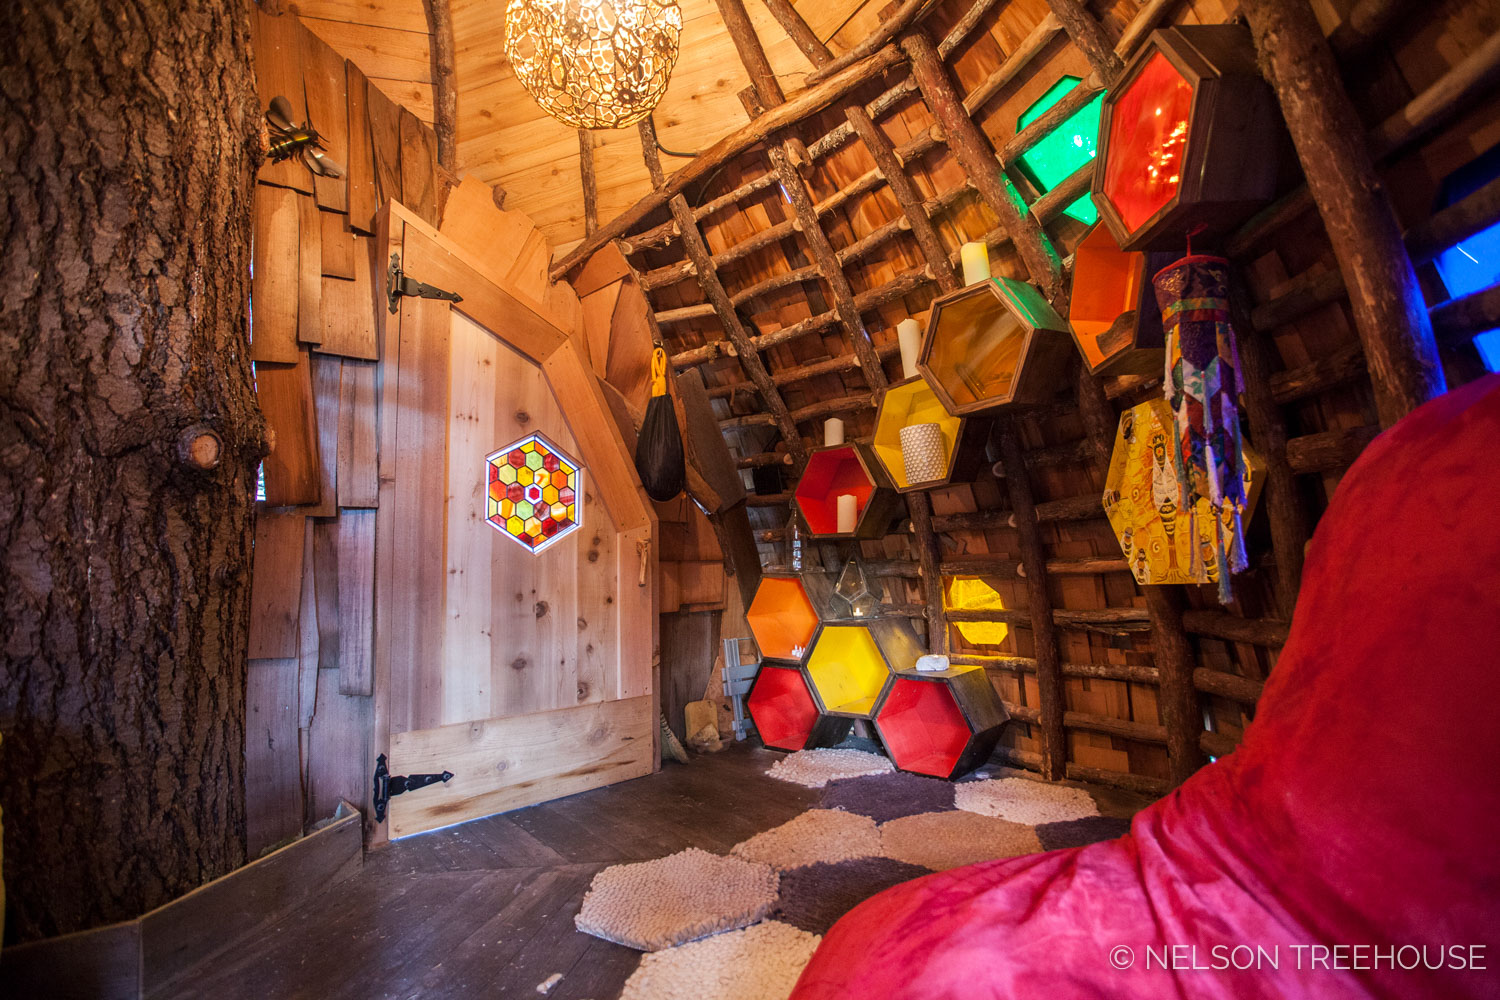  Inside the Beehive Treehouse 